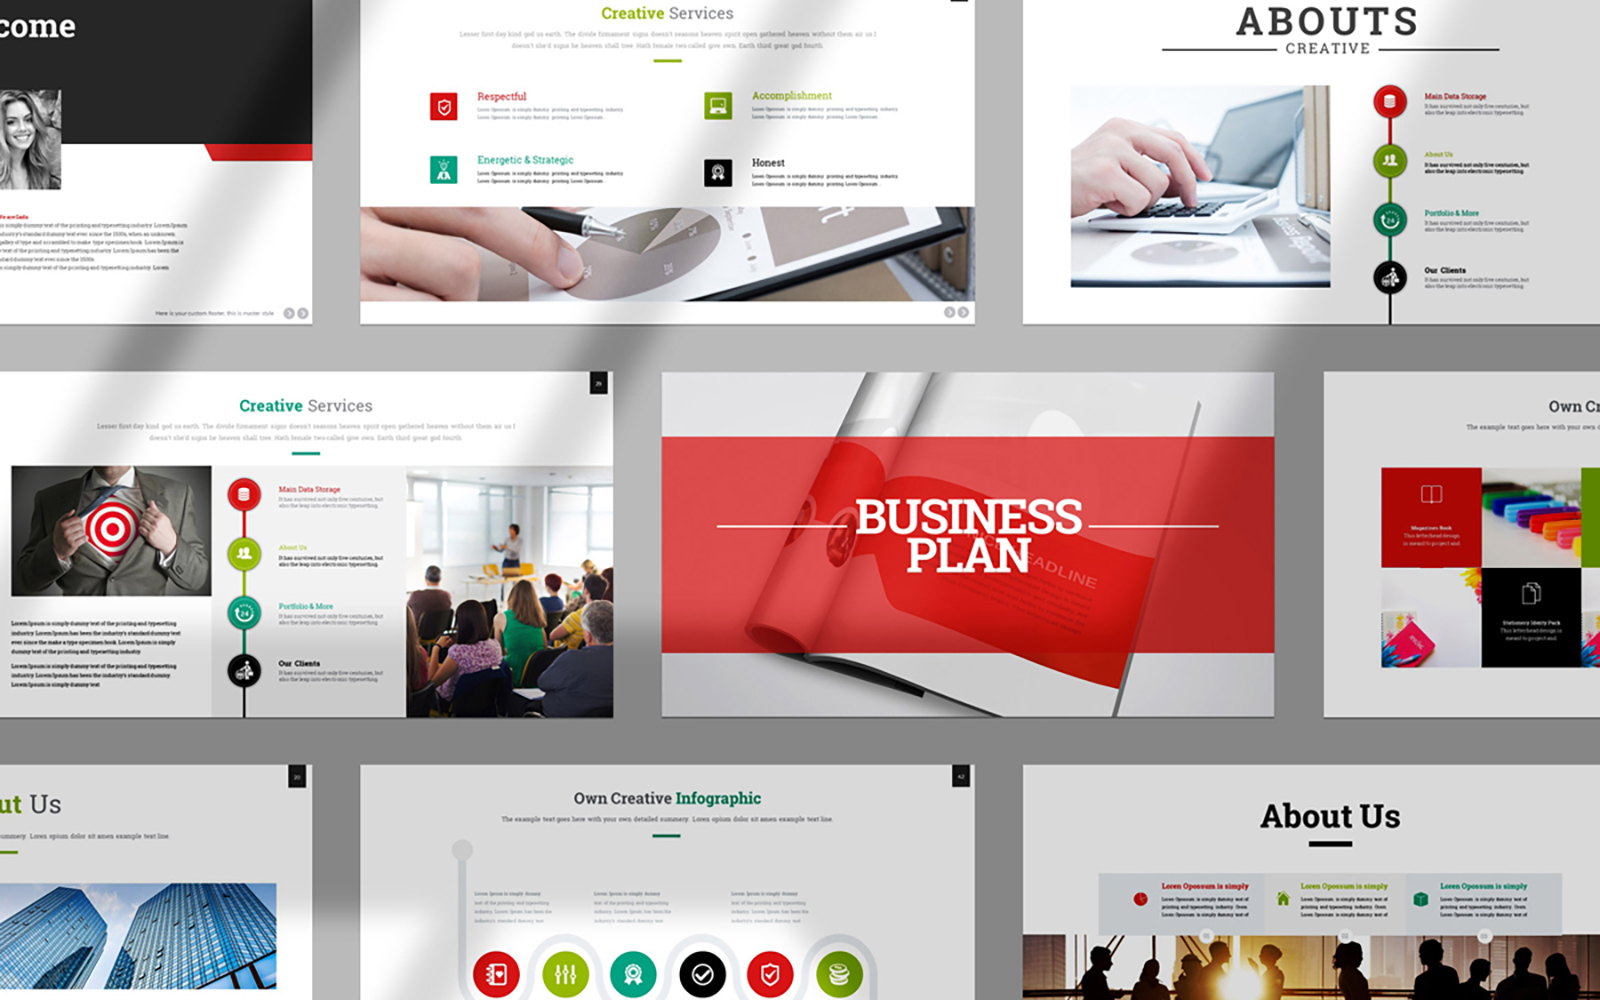 Business Plan PowerPoint Presentation Template in multiple color